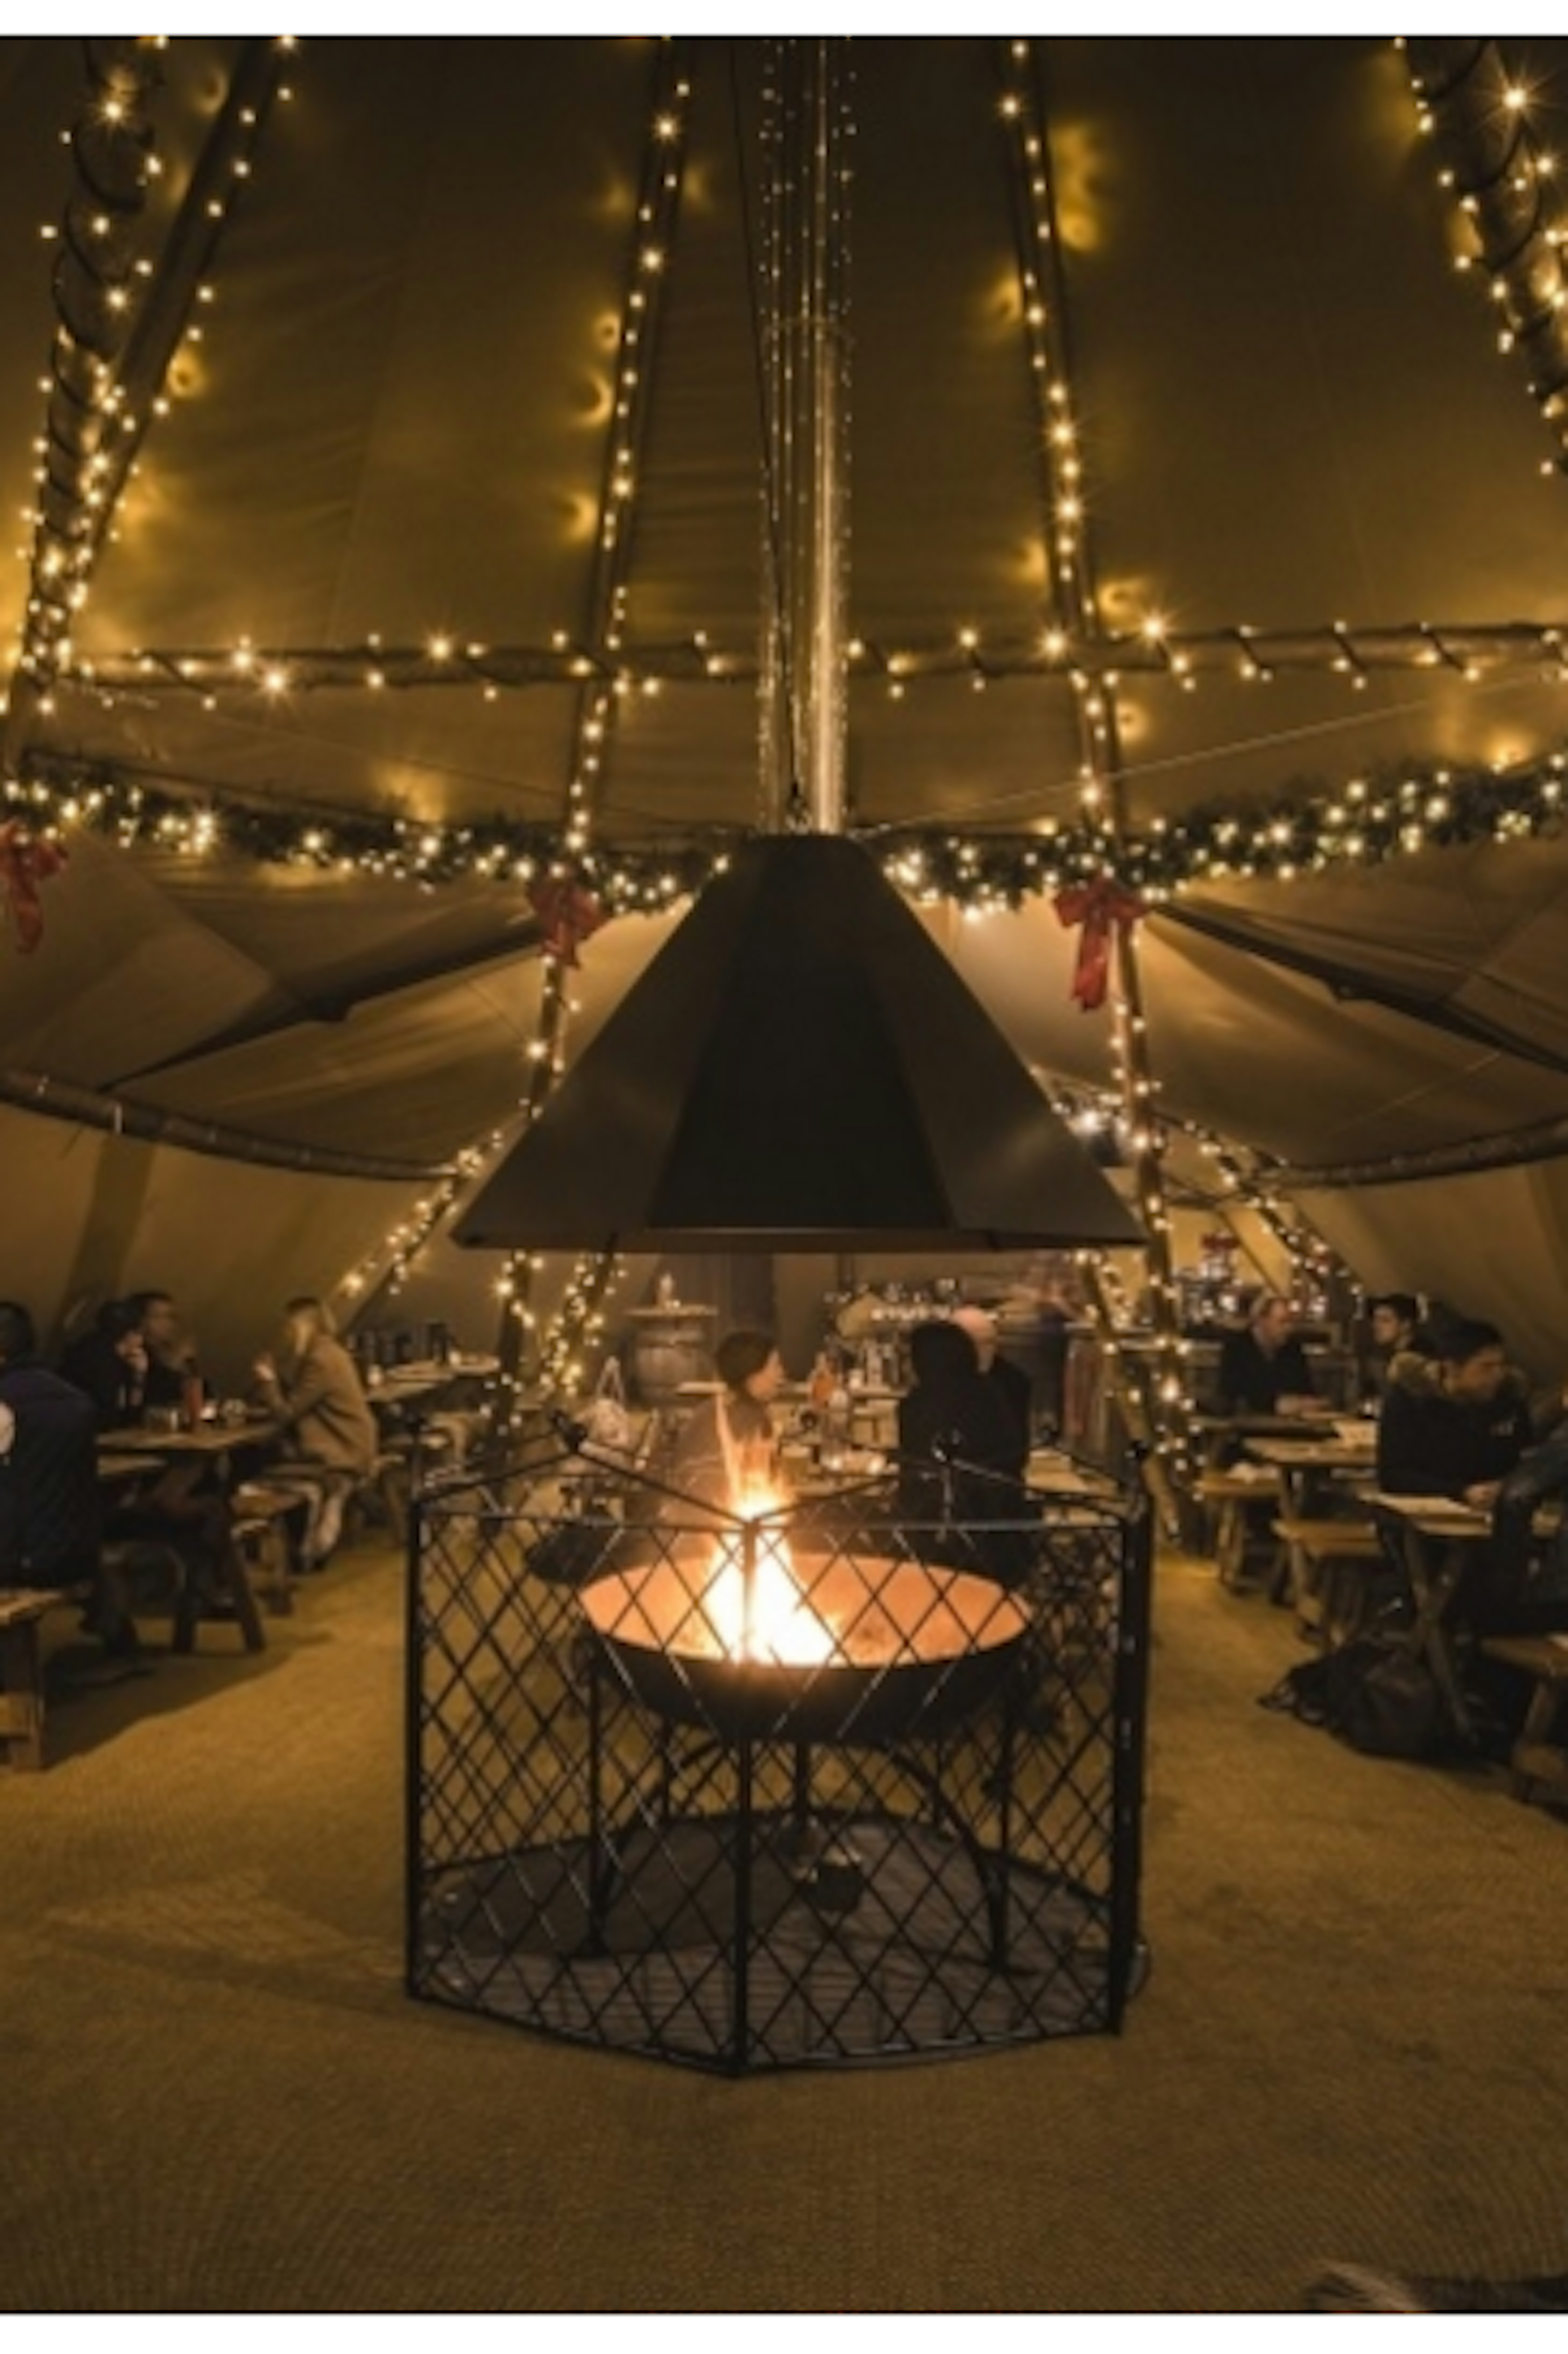 Business | The Curious TeePee